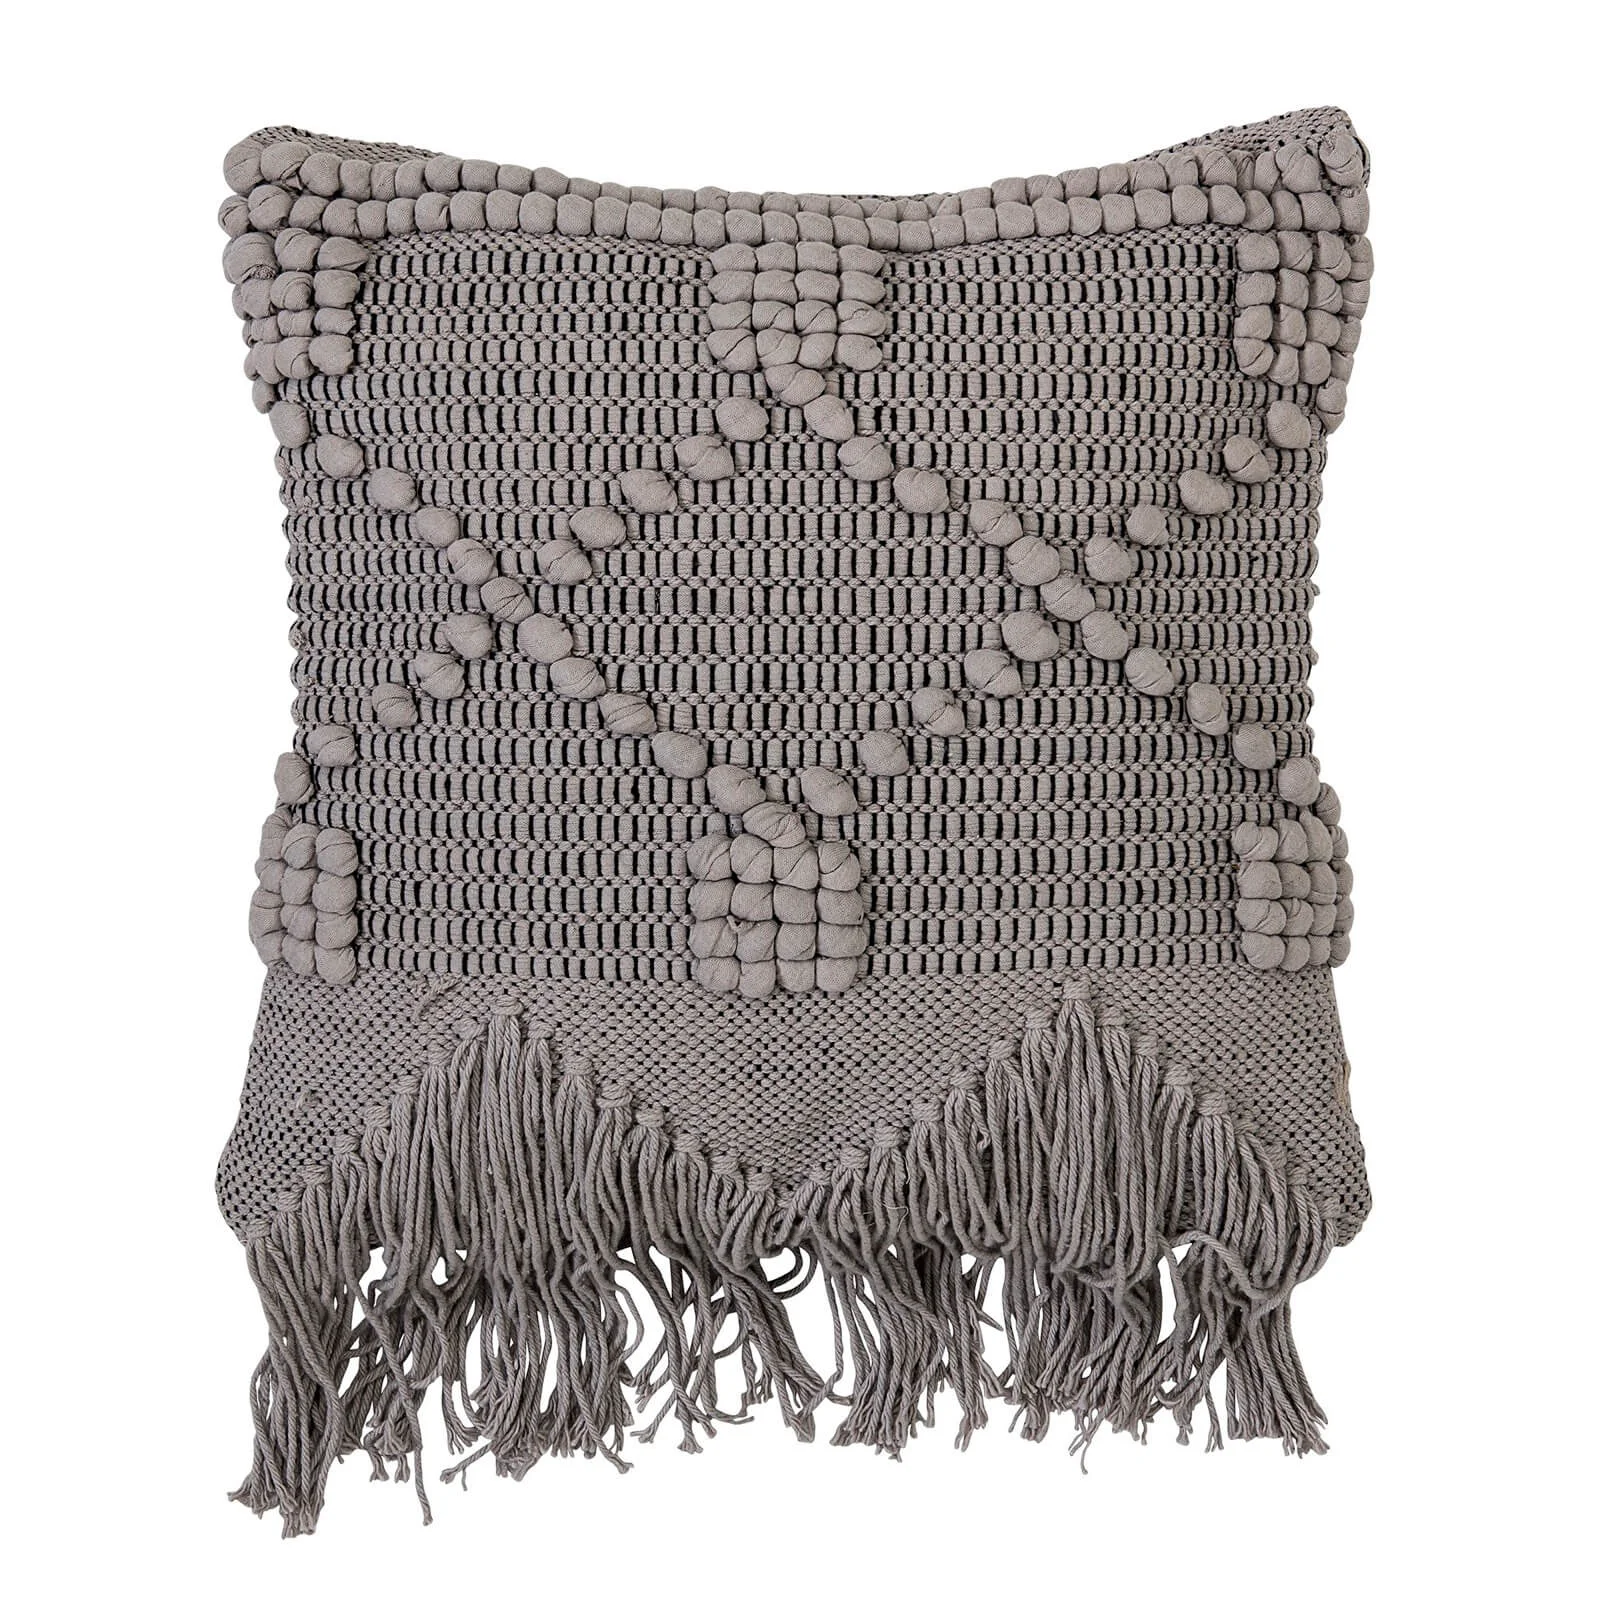 Bloomingville Chunky Knitted Cushion - Grey Image 1